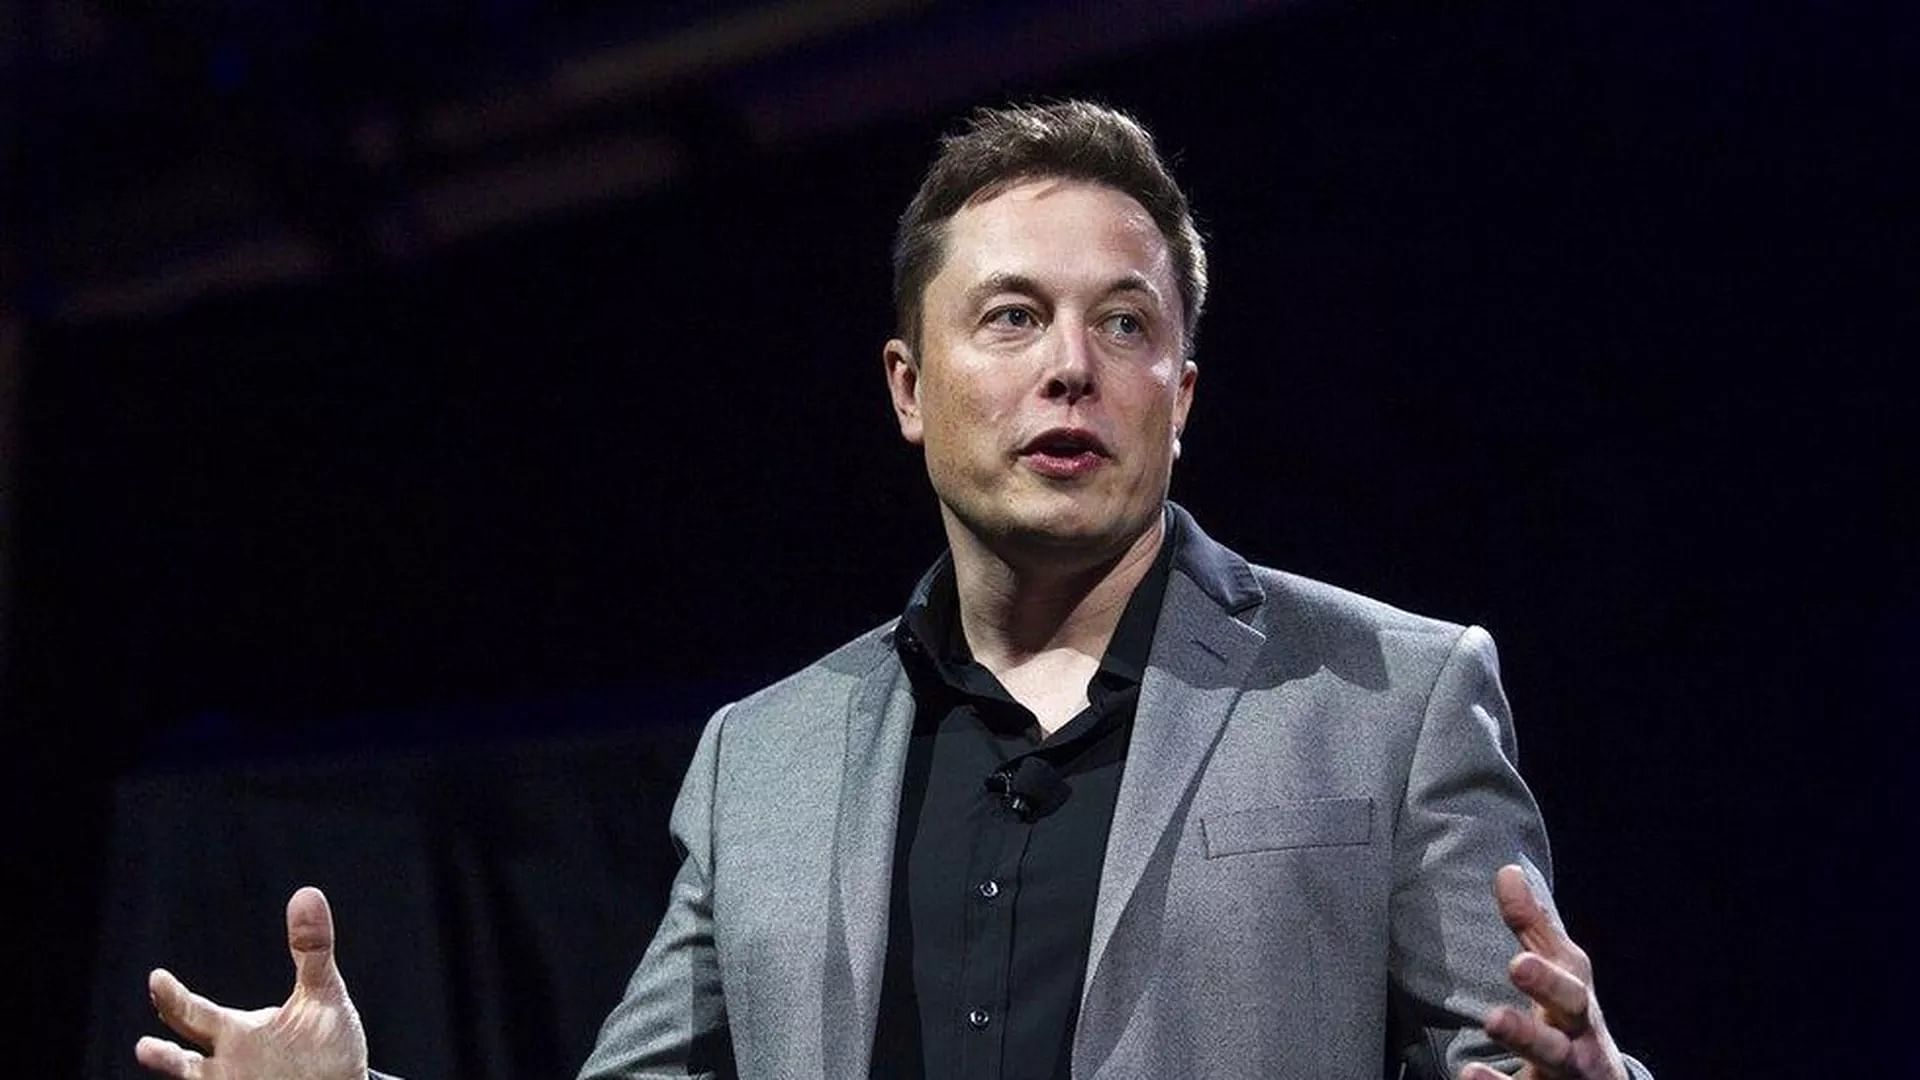 Elon Musk, Tesla founder, has said the company won’t file lawsuits against anyone who wants to use its technology in good faith.&nbsp;